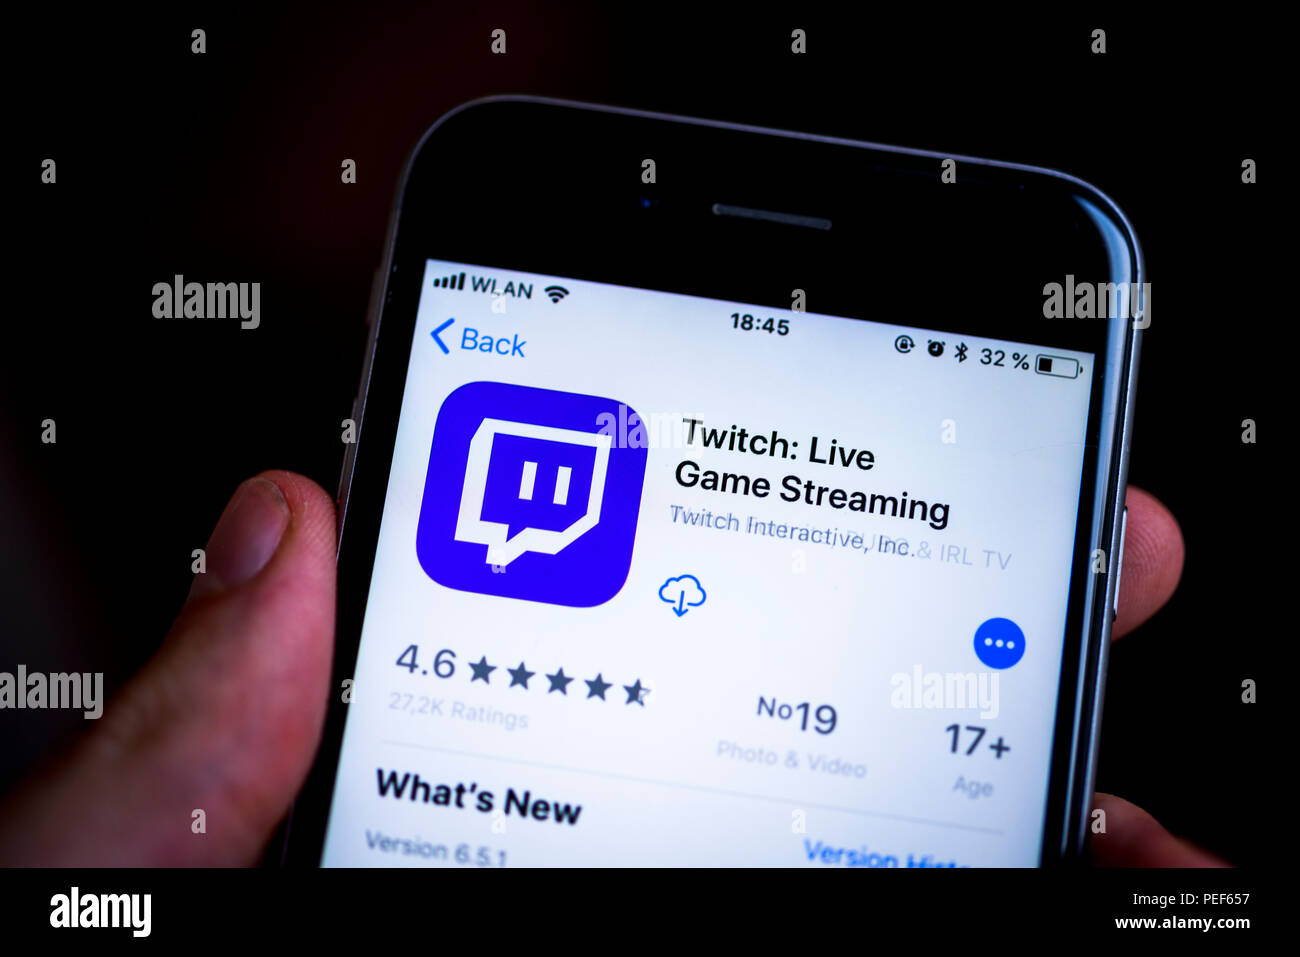 Twitch video download ios